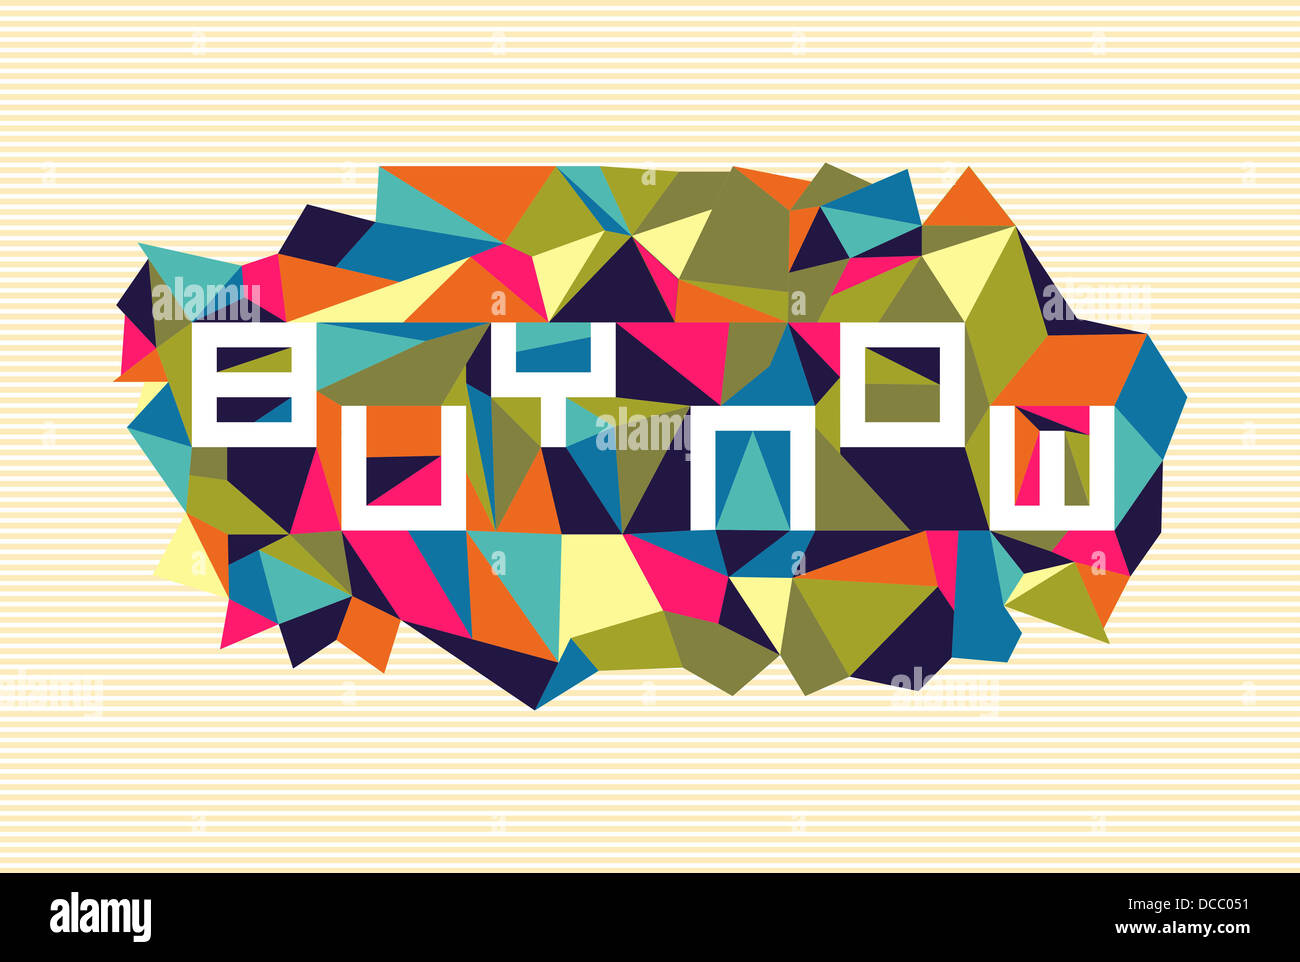 Concept buy now text over triangle composition background. Vector file layered for easy manipulation and custom coloring. Stock Photo